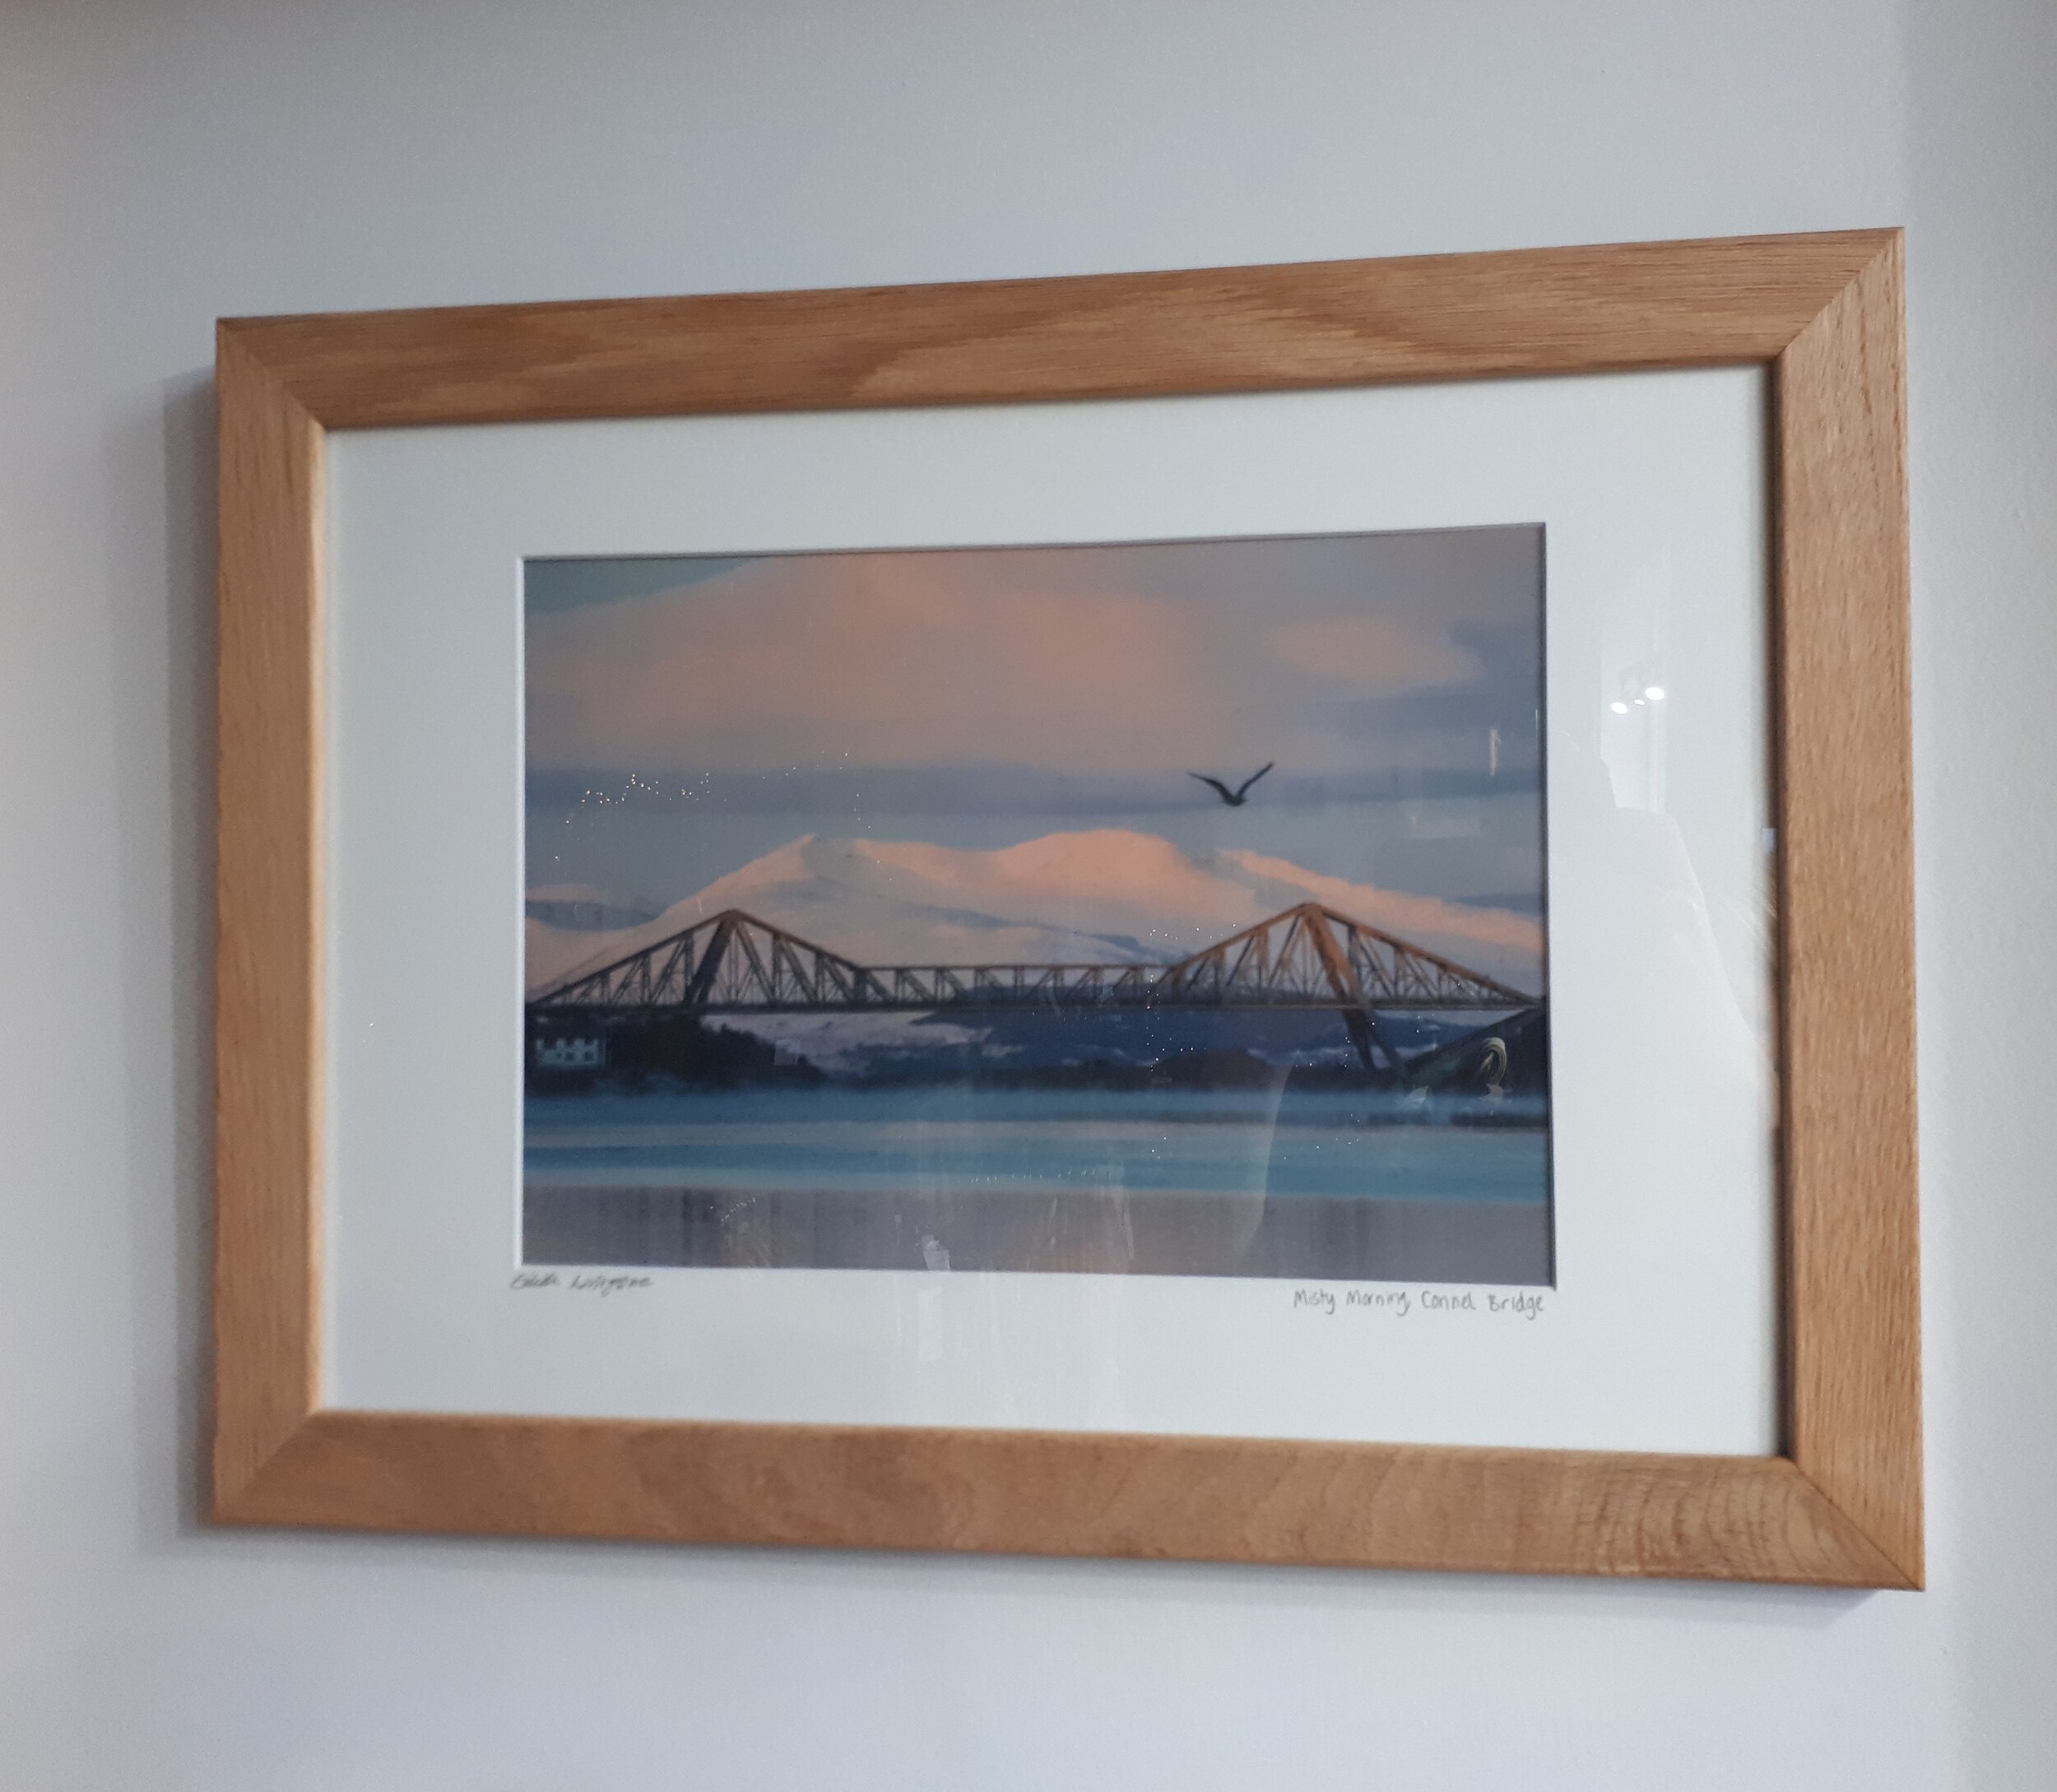 Solid Oak Framed A3 Mounted Print (20x16 inches with mount)